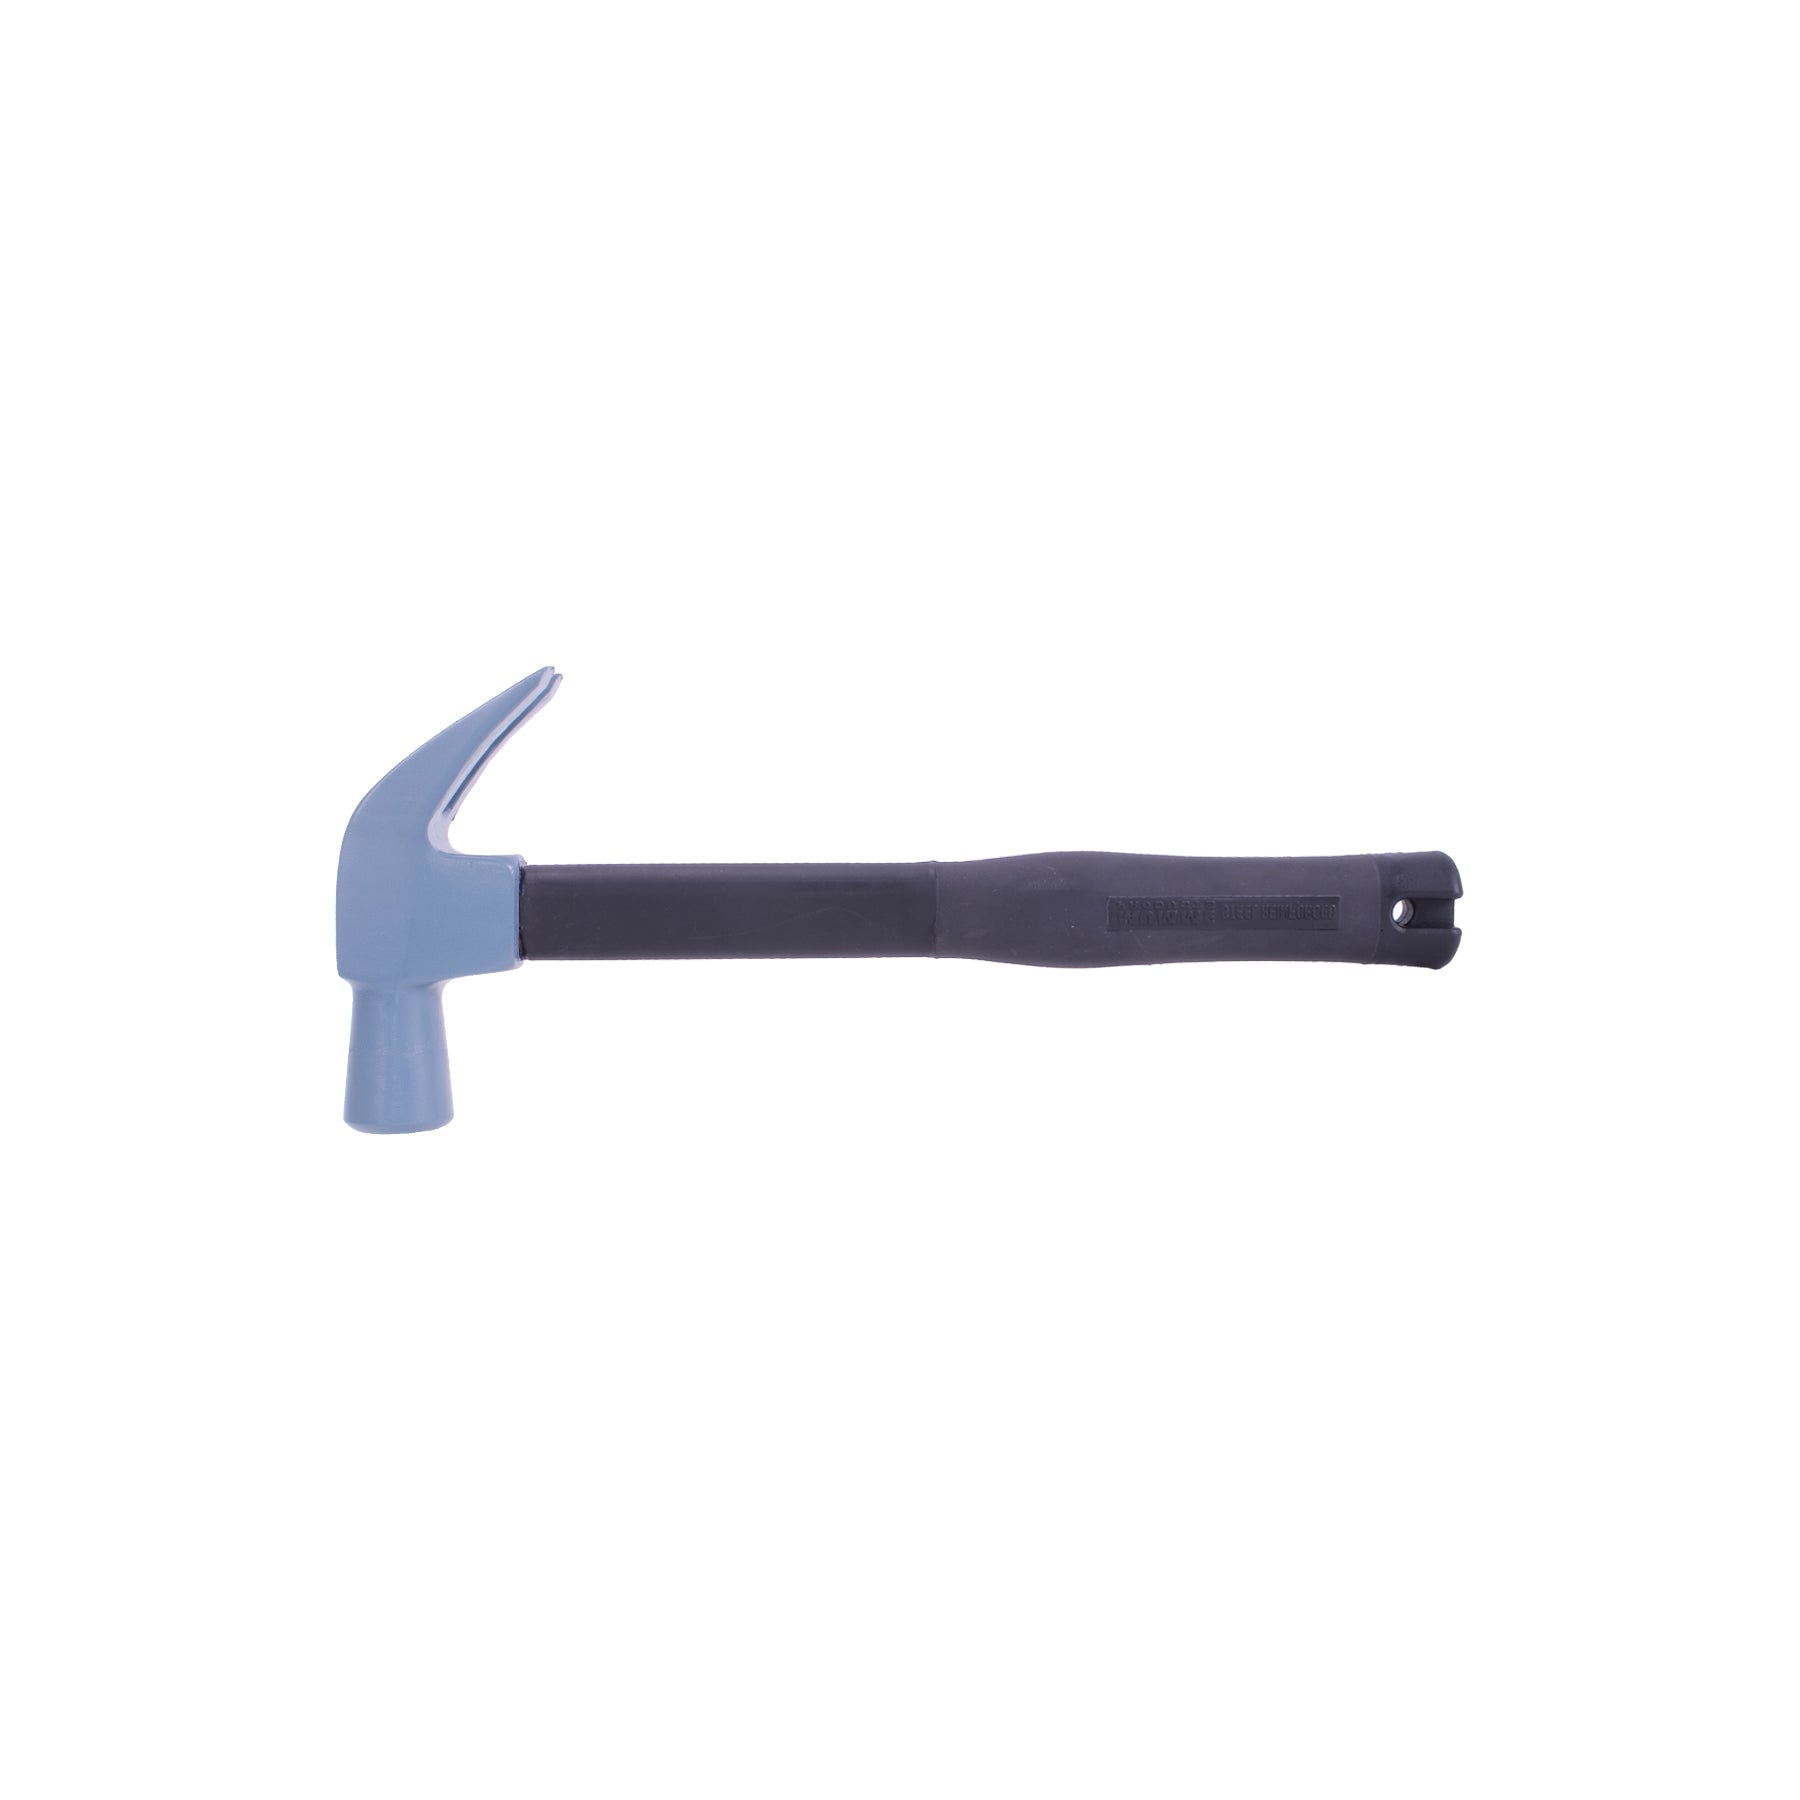 675g Normalised Claw Hammer with 360mm Steel Core Fibreglass Handle 7HCLNFRH0.675 by Mumme